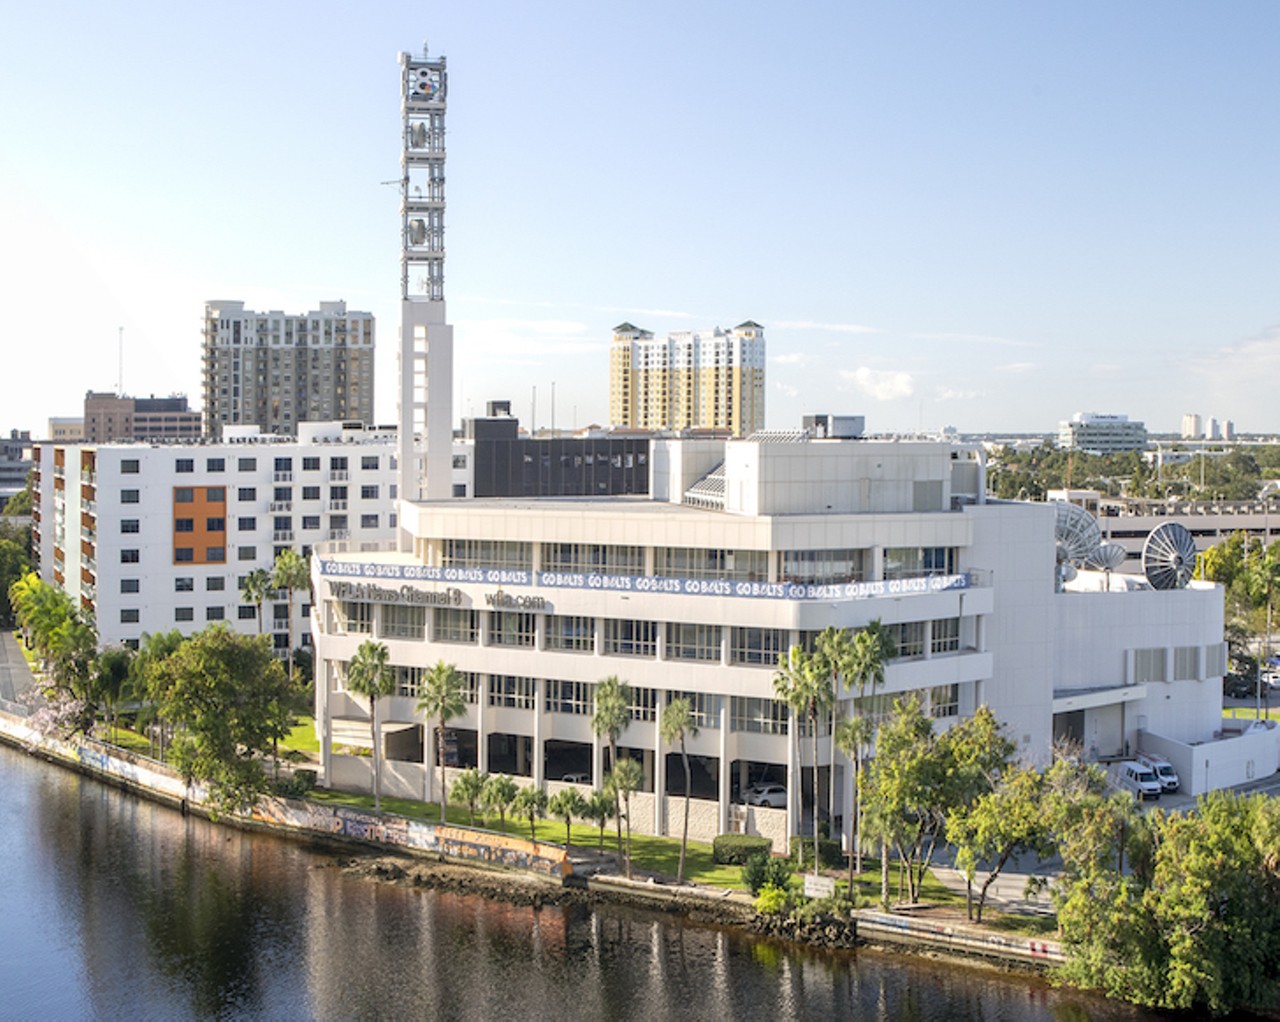 NOW
WFLA News Channel 8 building
Manor Riverwalk Apartments in the background, 2020.
In 2016 the Tampa Bay Times purchased the Tampa Tribune following years of declining subscriptions and the advent of the digital revolution. It was the end of a 121-year-old daily newspaper that started as the Tampa Morning Tribune in 1893. The Tribune building once stood where the eight story Manor Riverwalk apartment complex (white building with orange design in the background) now stands. Pictured here is the 145,000 sq ft building that houses WFLA News Channel 8. Special thanks to the Sheraton Tampa Riverwalk Hotel for granting access for this photograph.